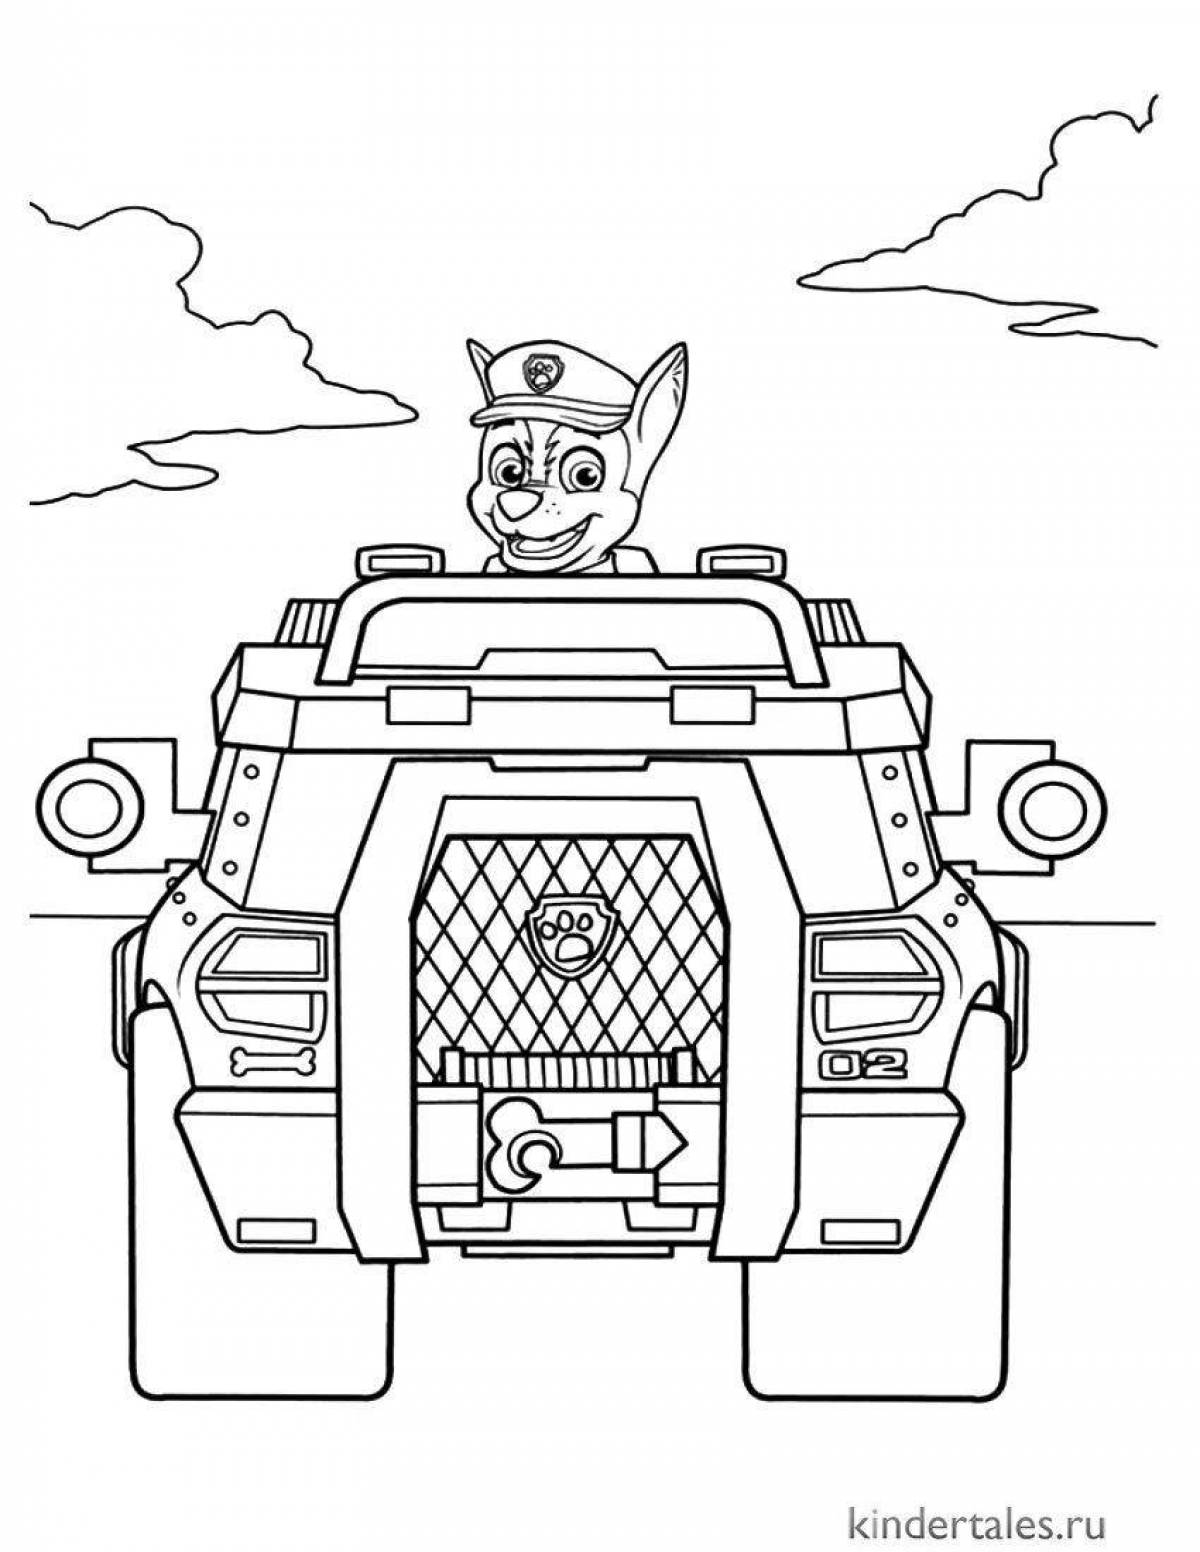 Dynamic racer coloring page for kids